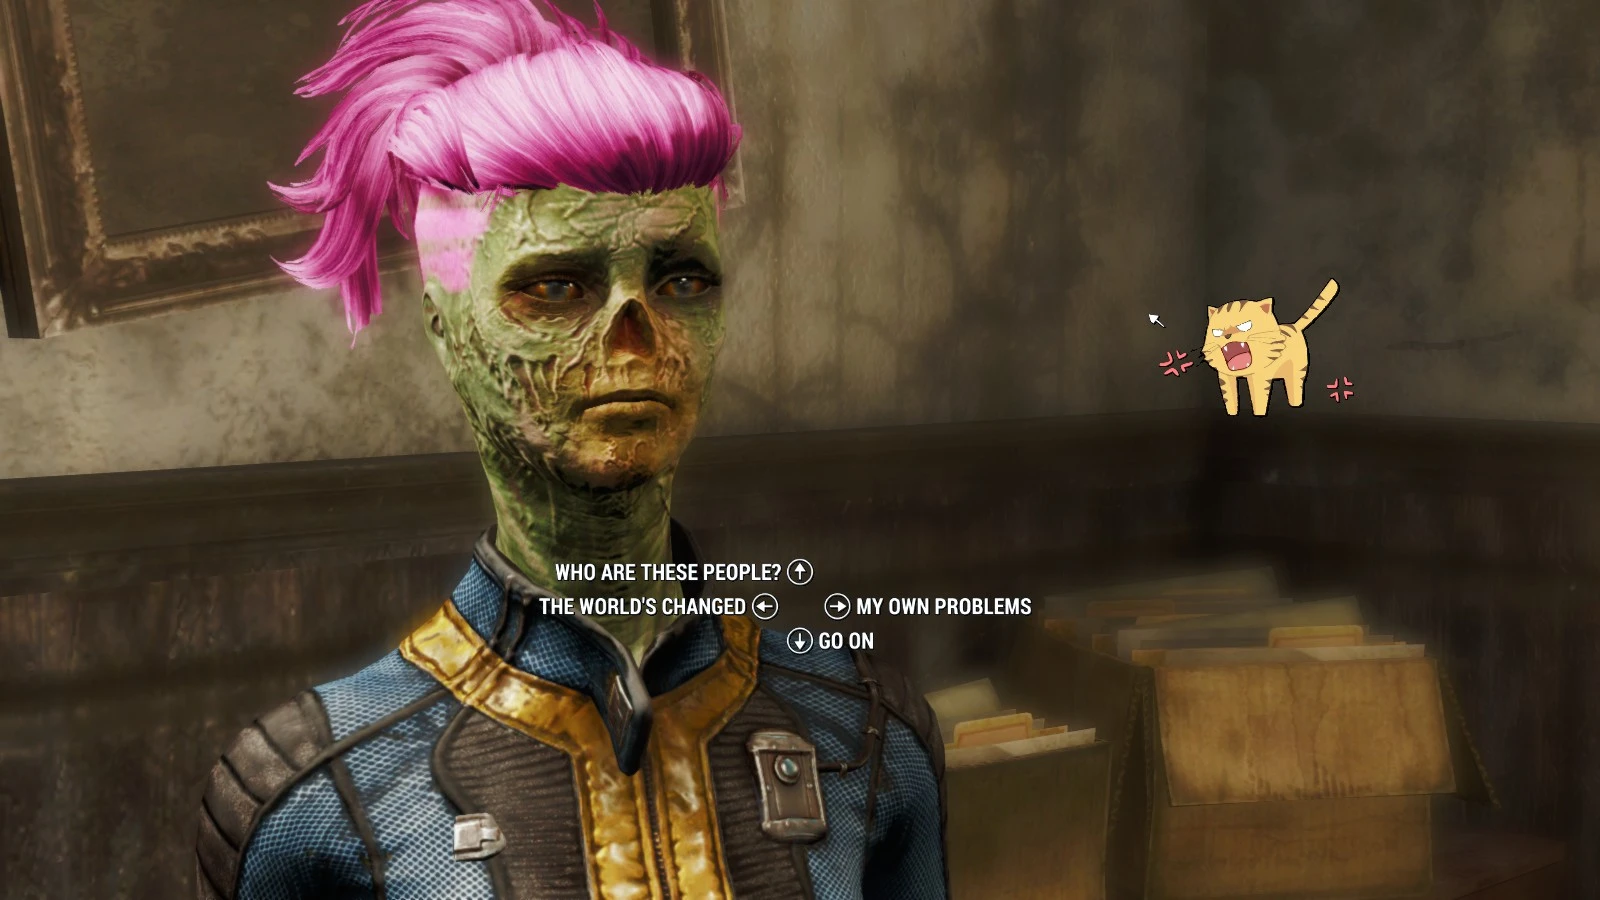 Green Ghoul with Hot Pink Hair. 